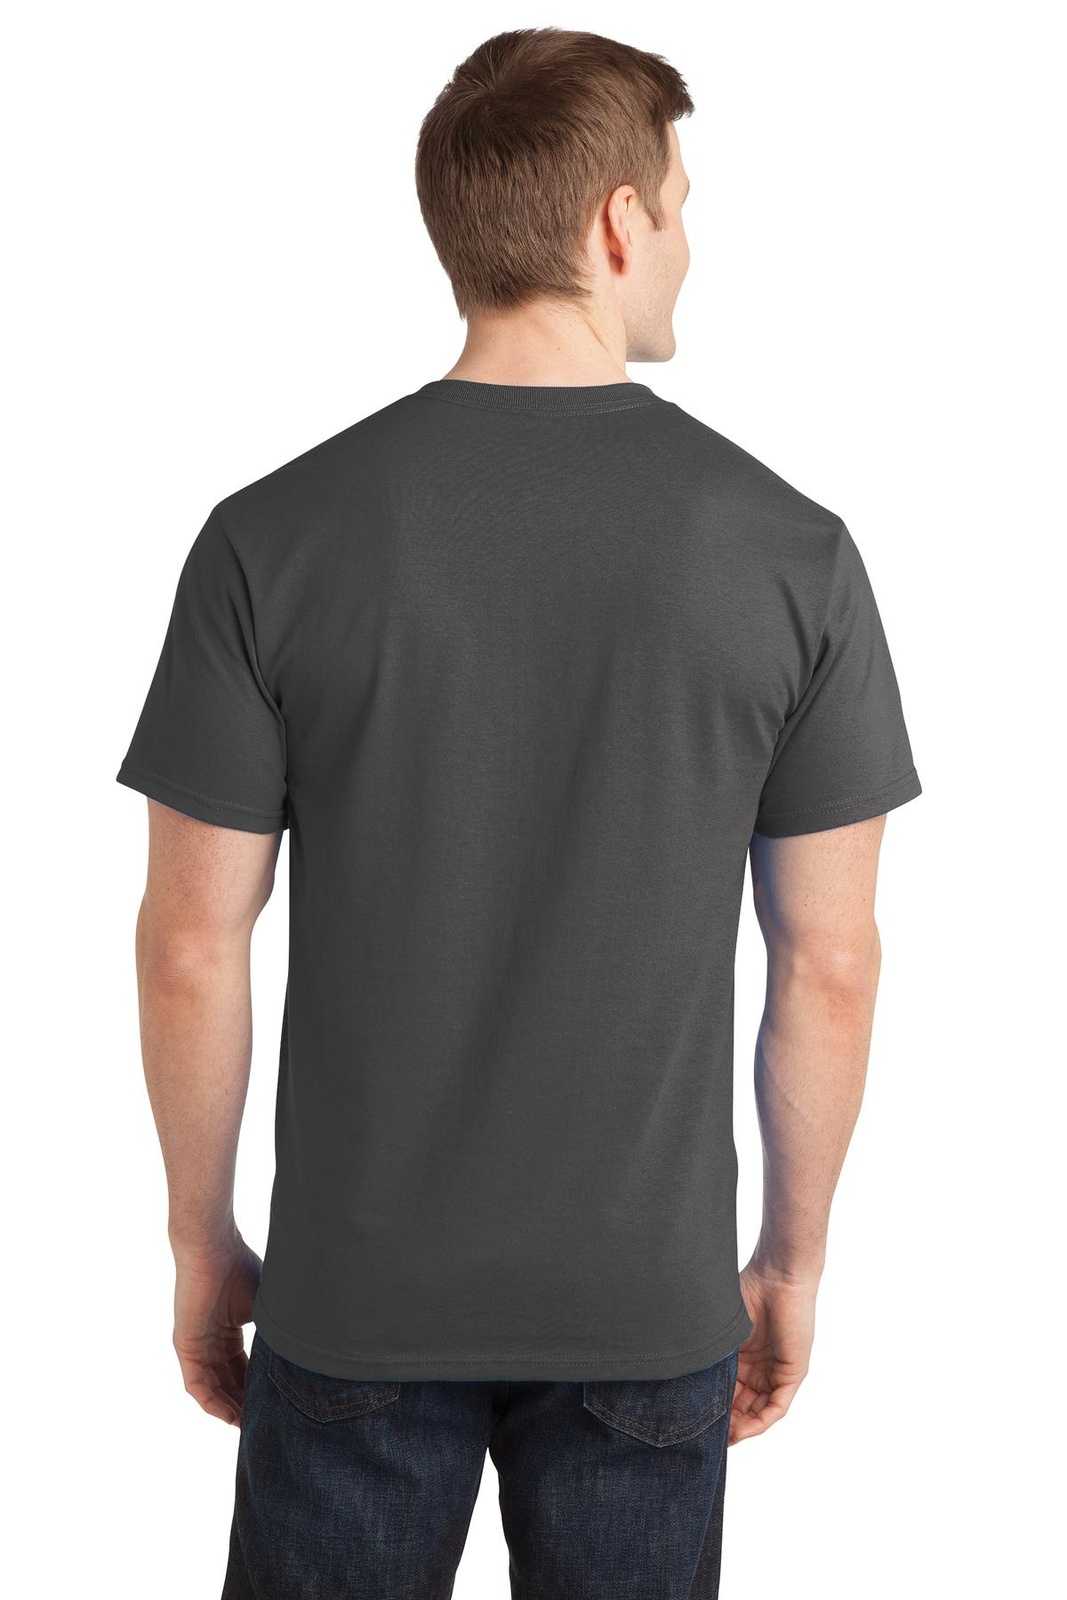 Port & Company PC150 Ring Spun Cotton Tee - Charcoal - HIT a Double - 1